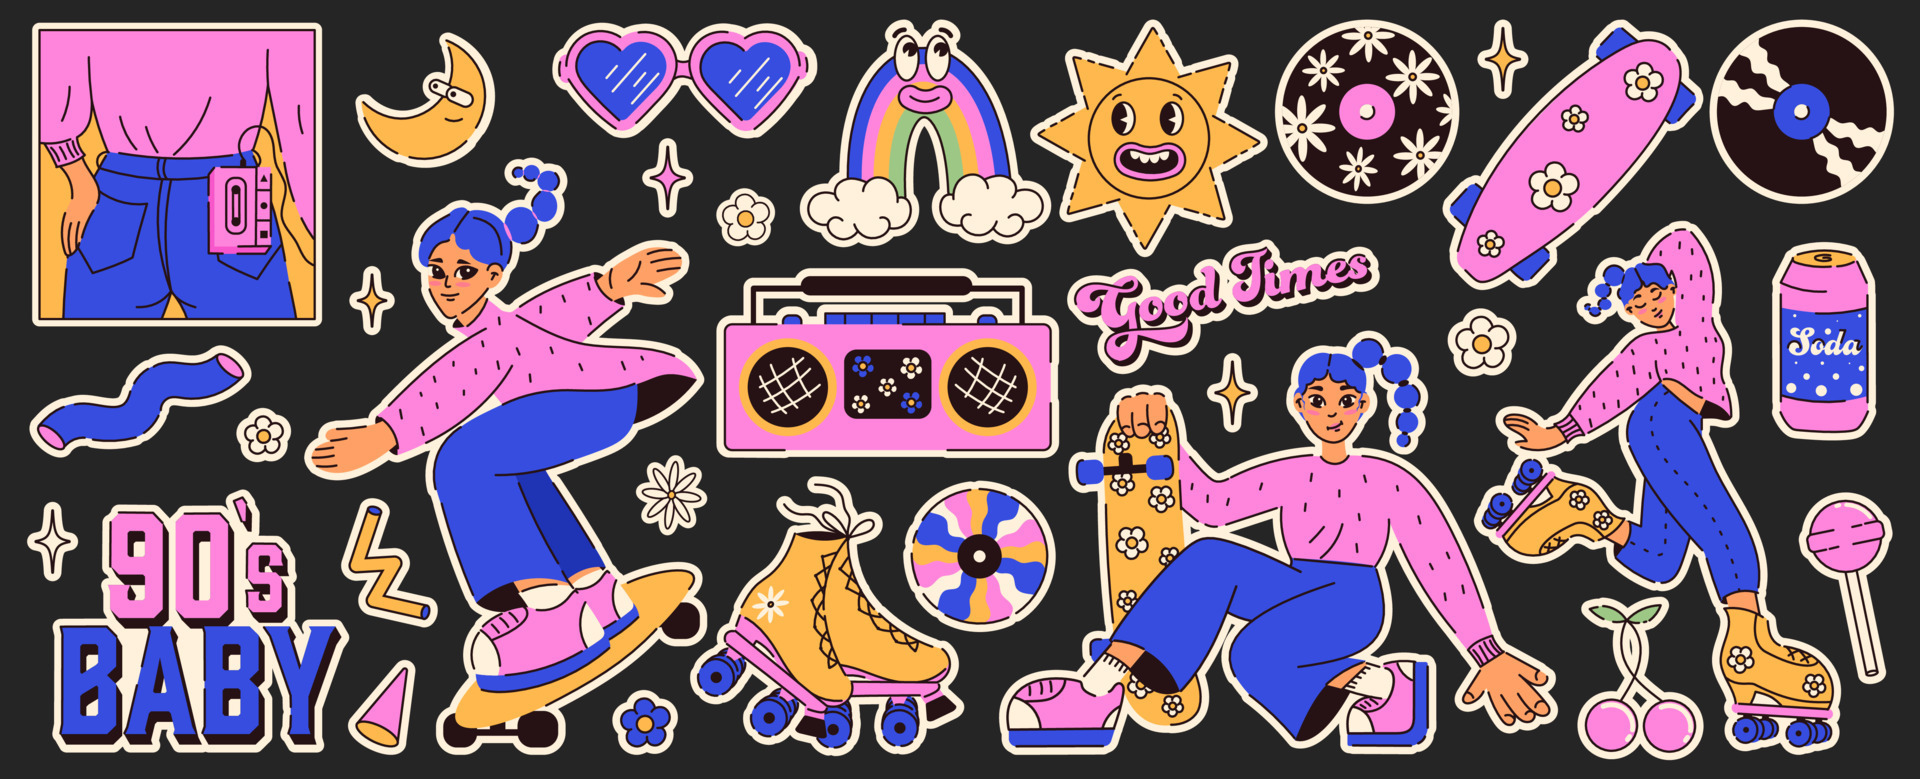 Nostalgic 90s Stickers for Edits and Overlays